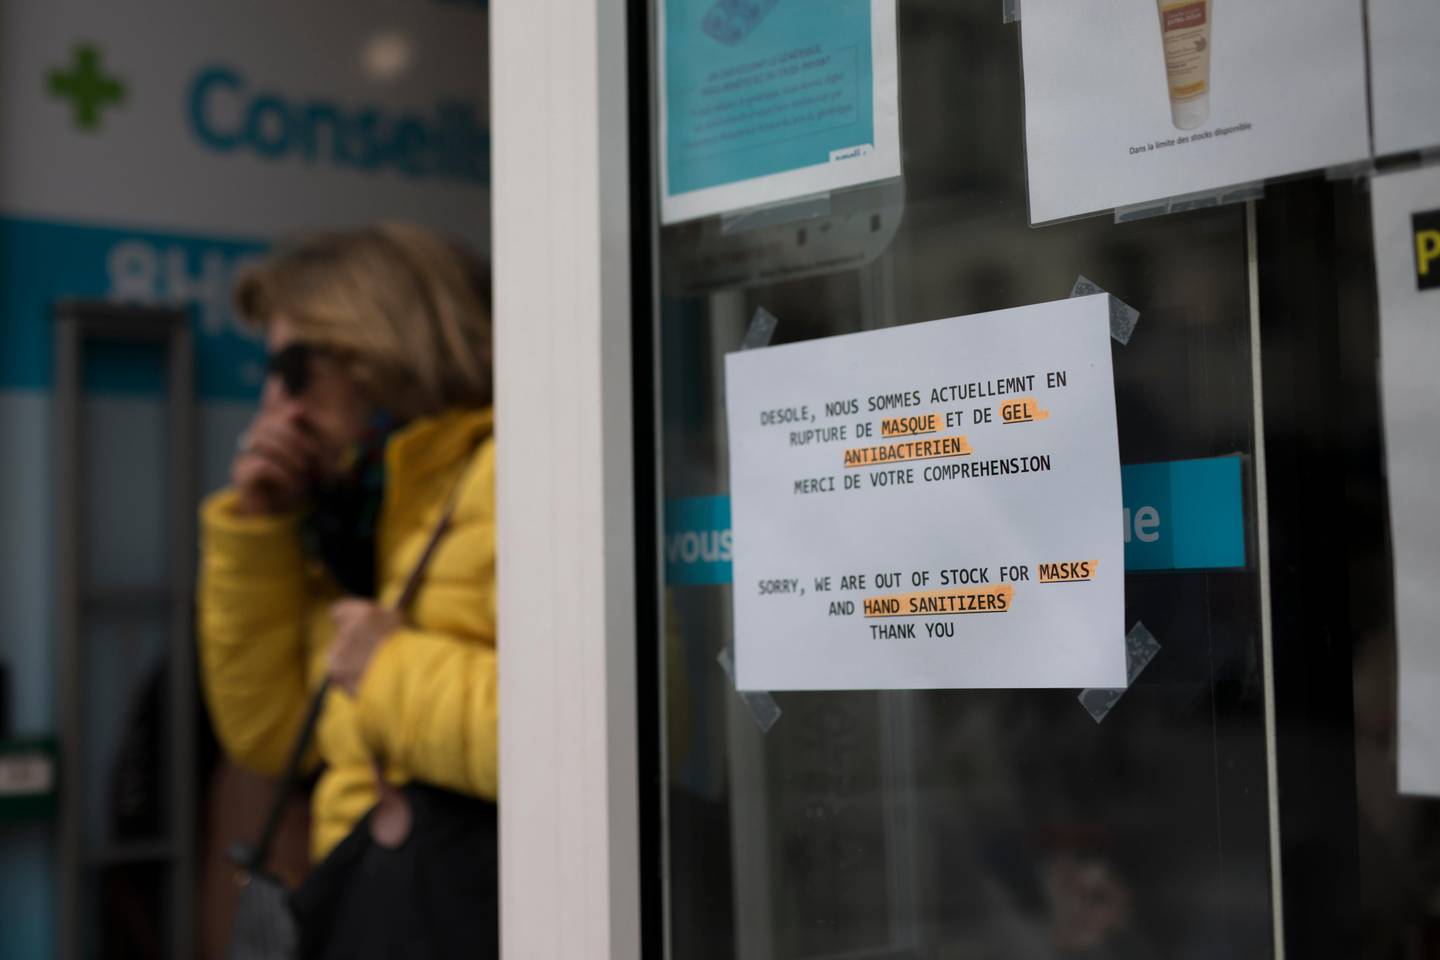 A sign is displayed at the entrance to a pharmacy in Marseille, southern France, Tuesday, March 3, 2020. As the new coronavirus takes hold in Europe, the continent is facing the same complications seen in Asia weeks ago. (AP Photo/Daniel Cole)